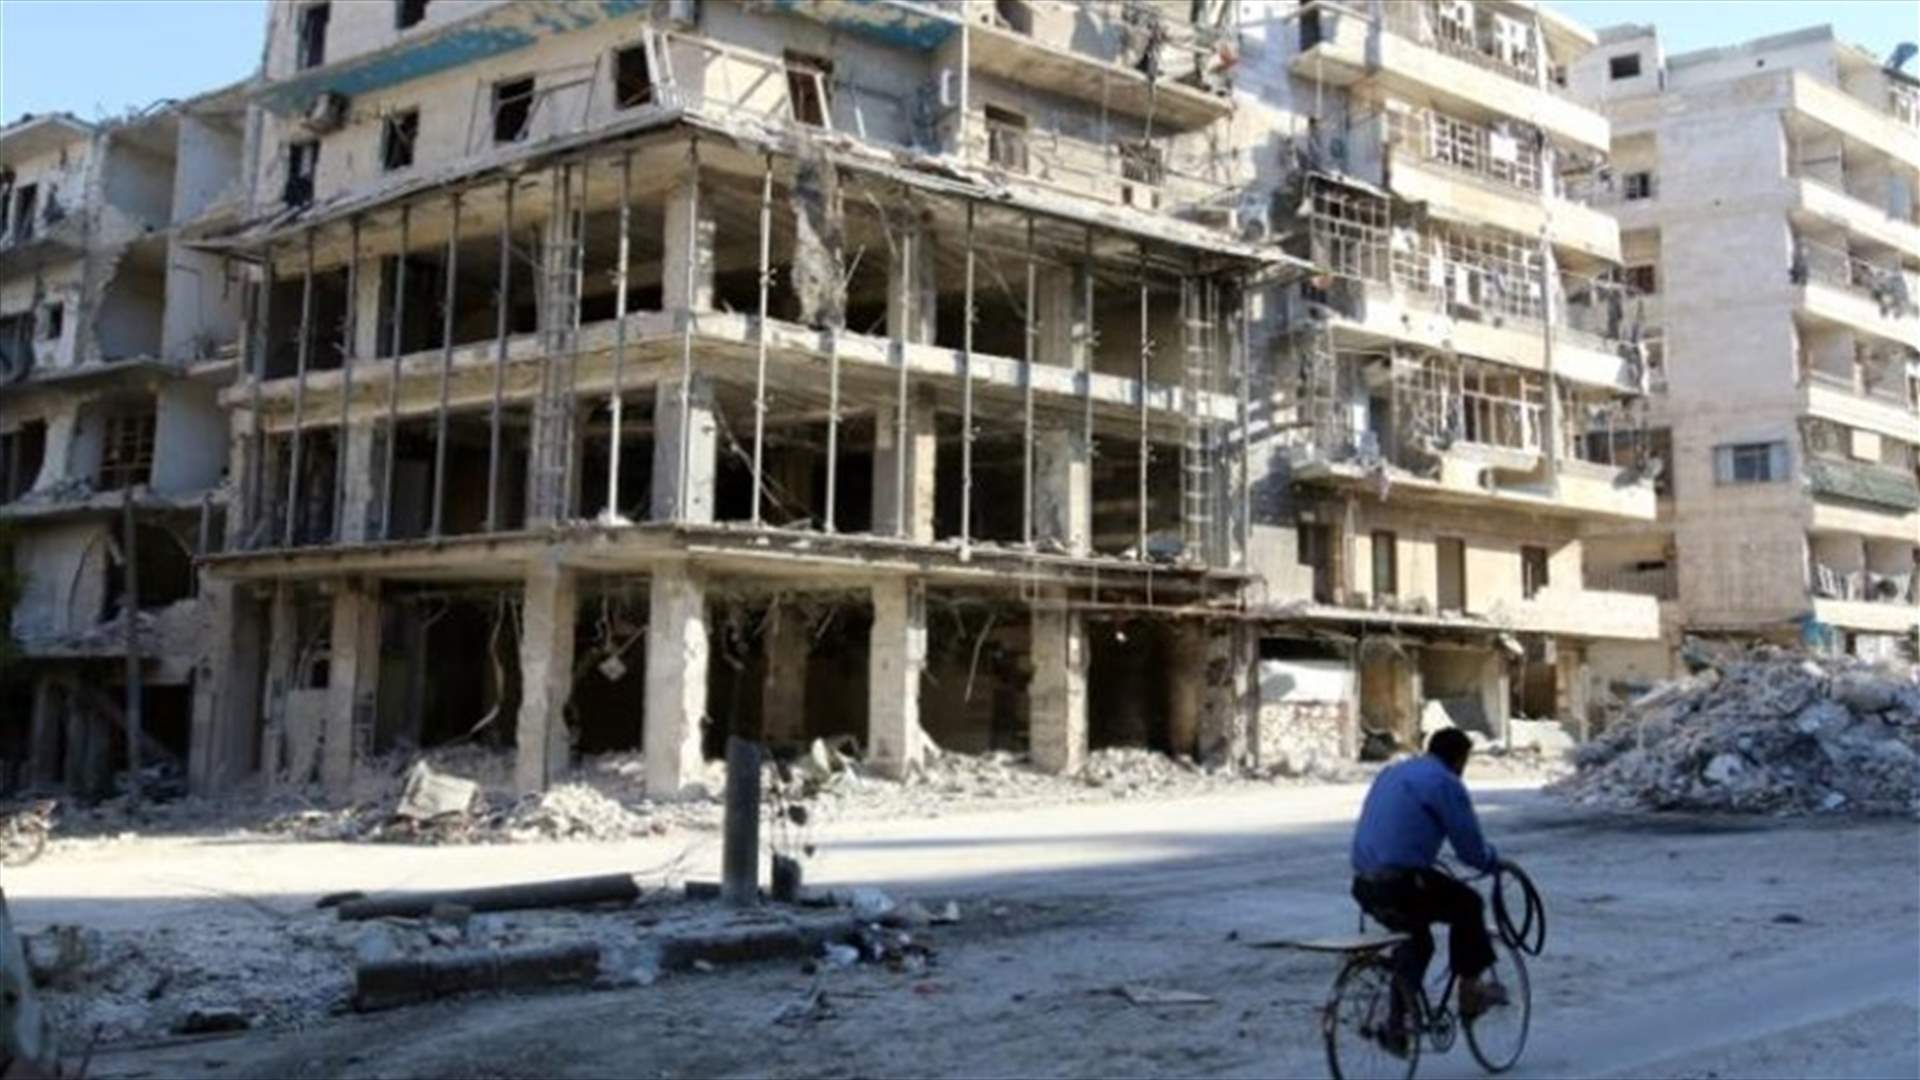 UN aborts plan to evacuate patients from Aleppo, blames all parties